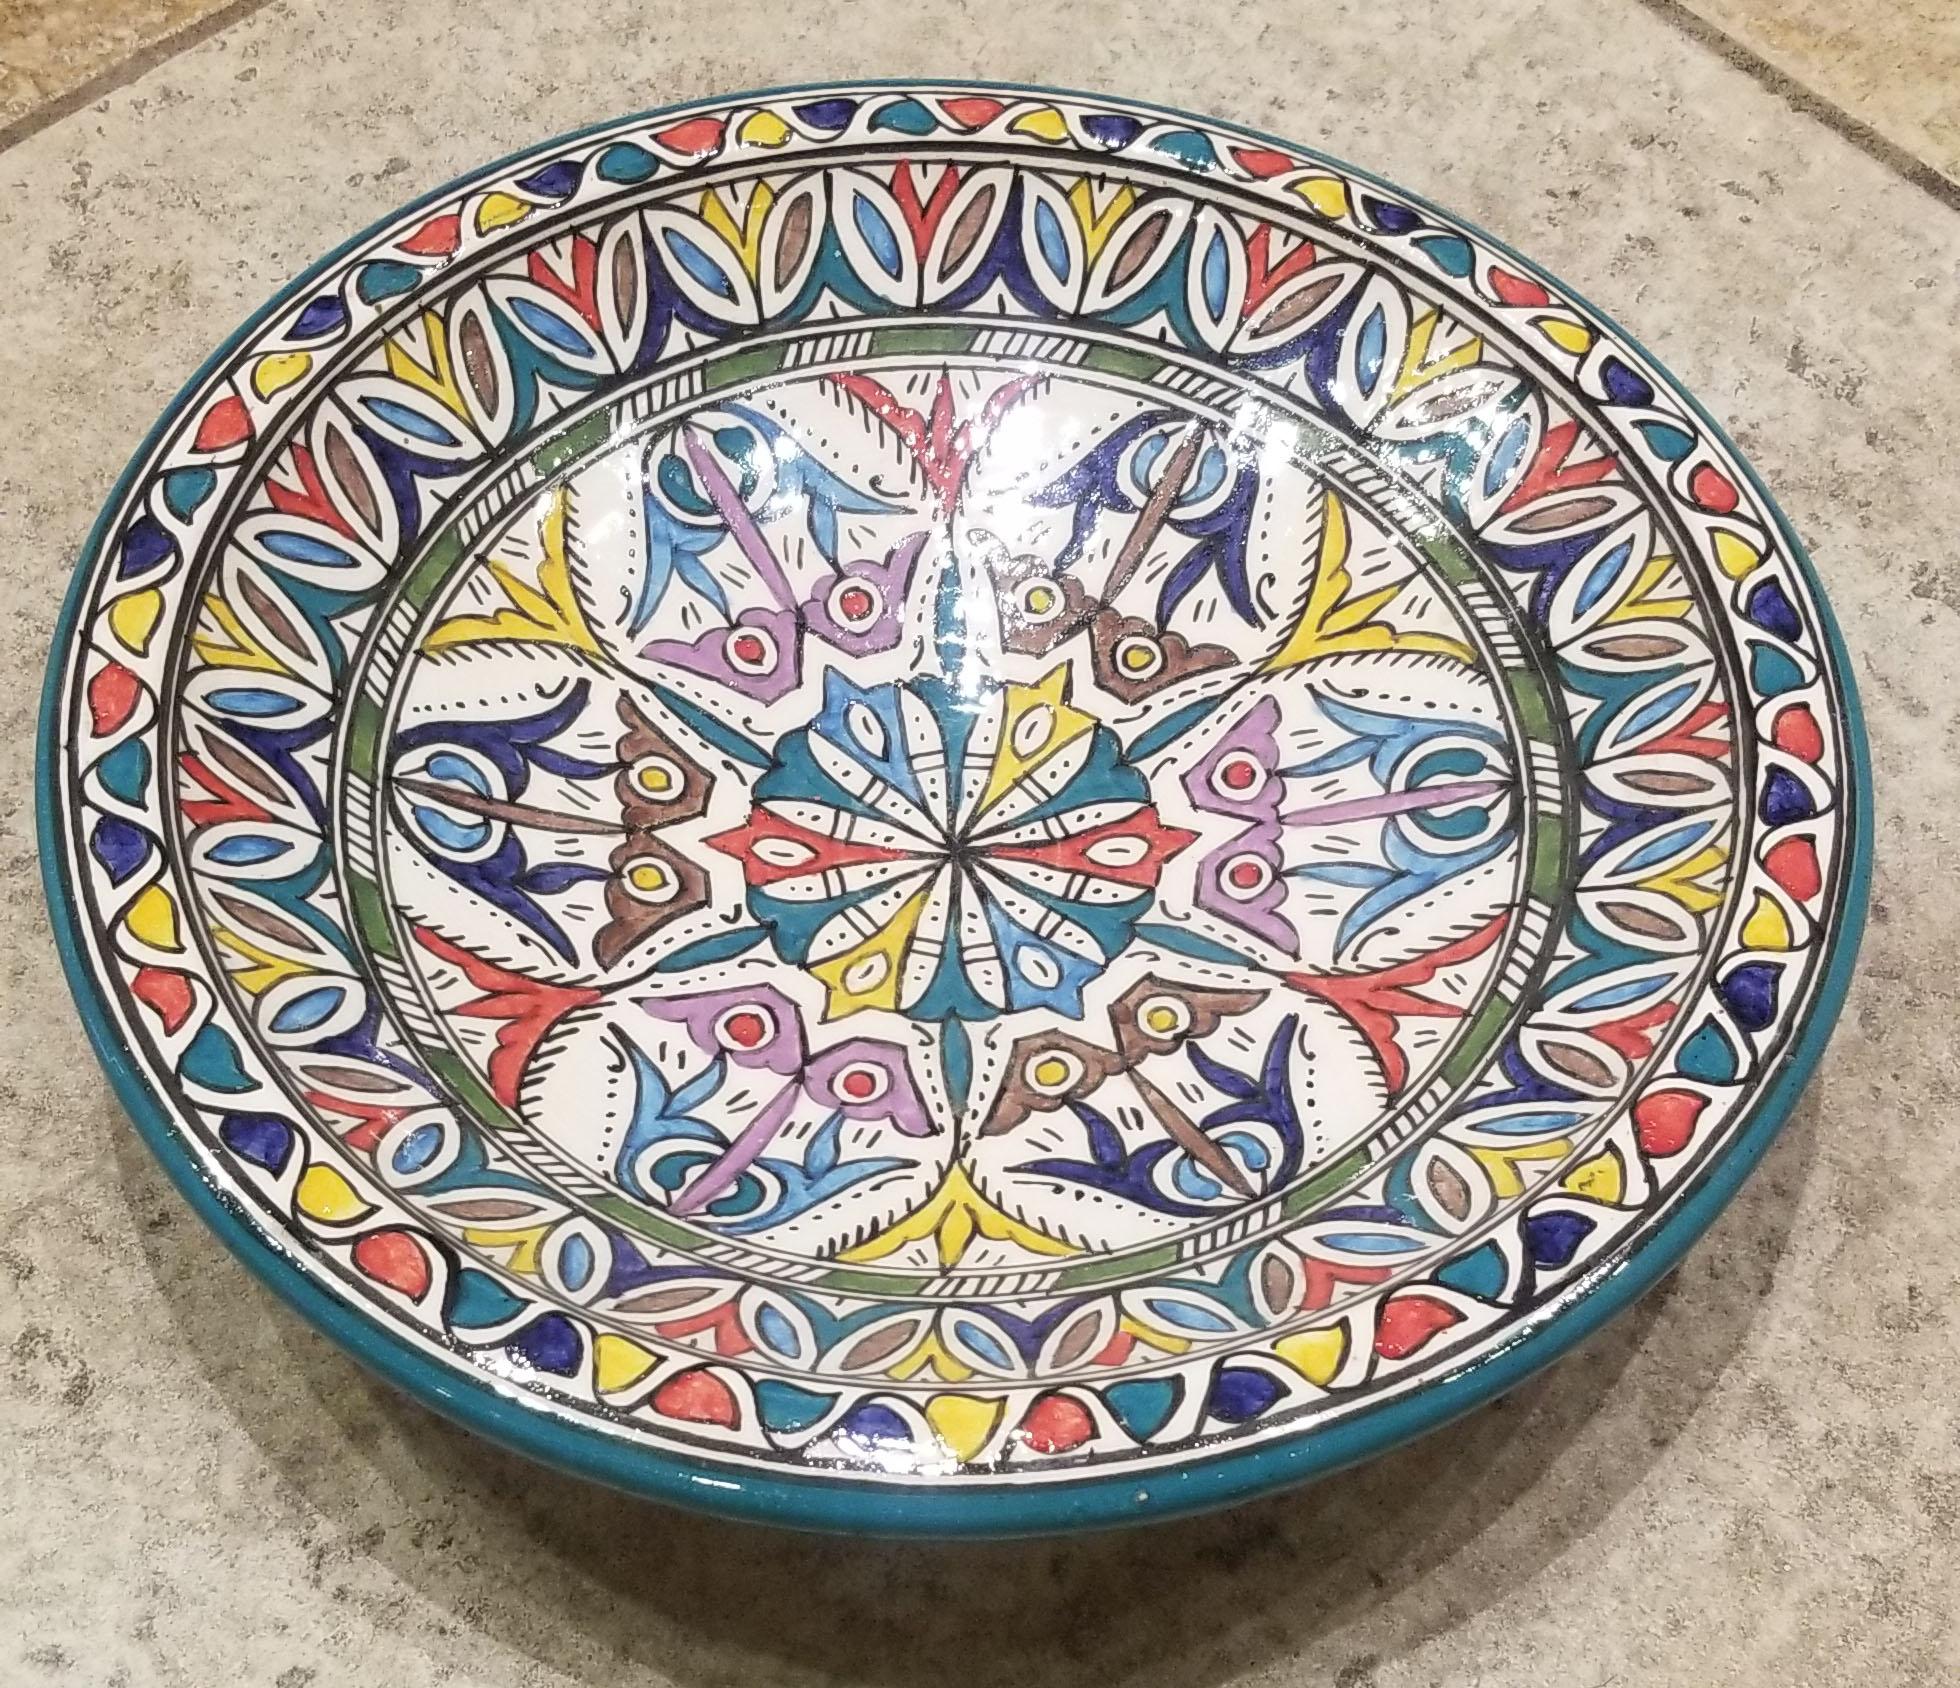 A rare or one of a kind exquisite Moroccan plate / charger not only for decoration purpose, but also to serve amazing food. This plate in hand painted and is multi-color. It would be a terrific add-on to any décor. Great Handcraftsmanship and